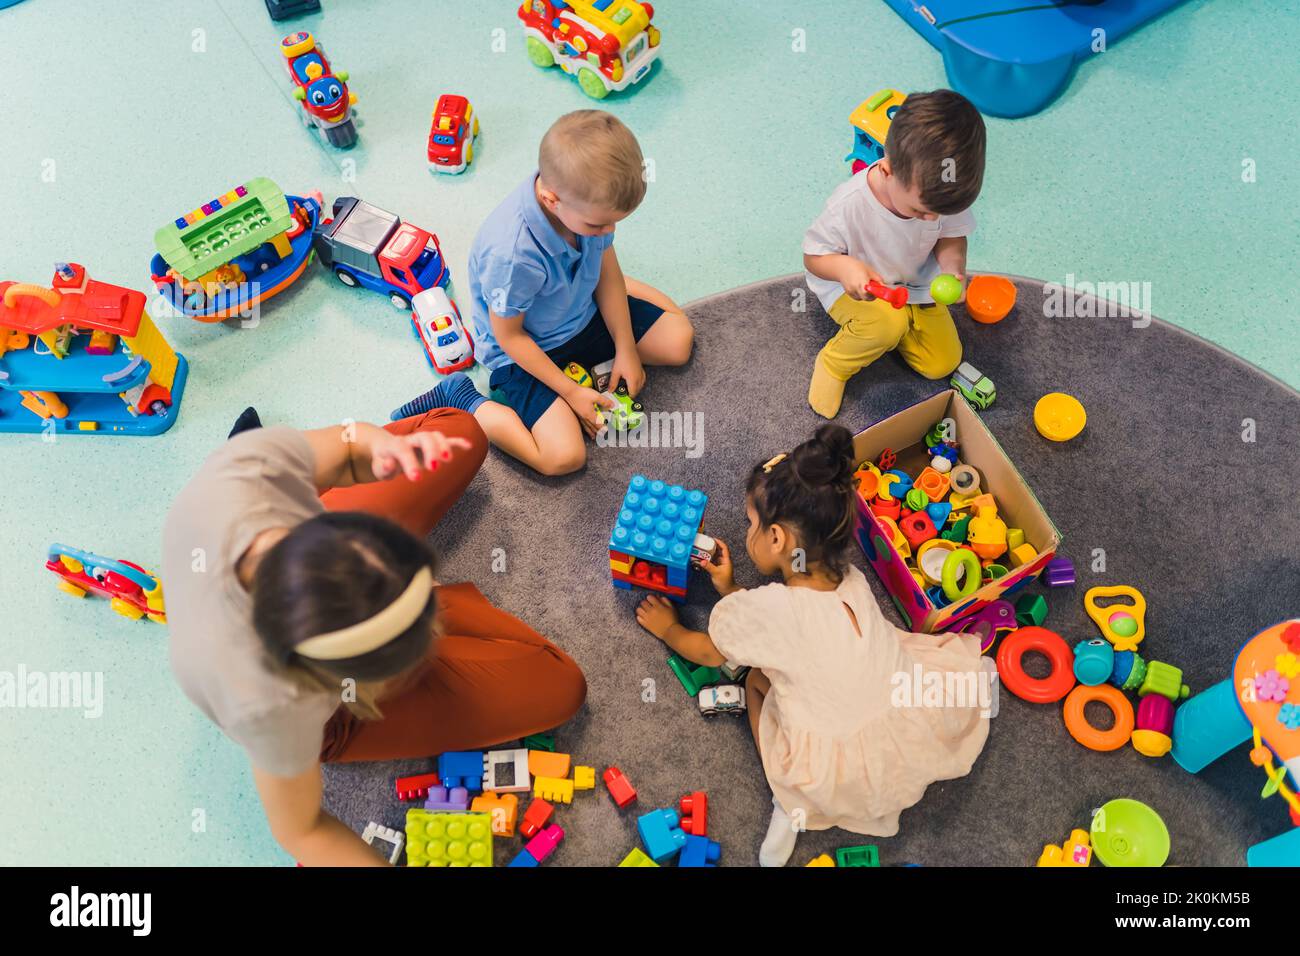 Toddlers and their nursery teacher playing with plastic building blocks and colorful car toys while sitting on the floor in a playroom. Early brain and skills development. High quality photo Stock Photo